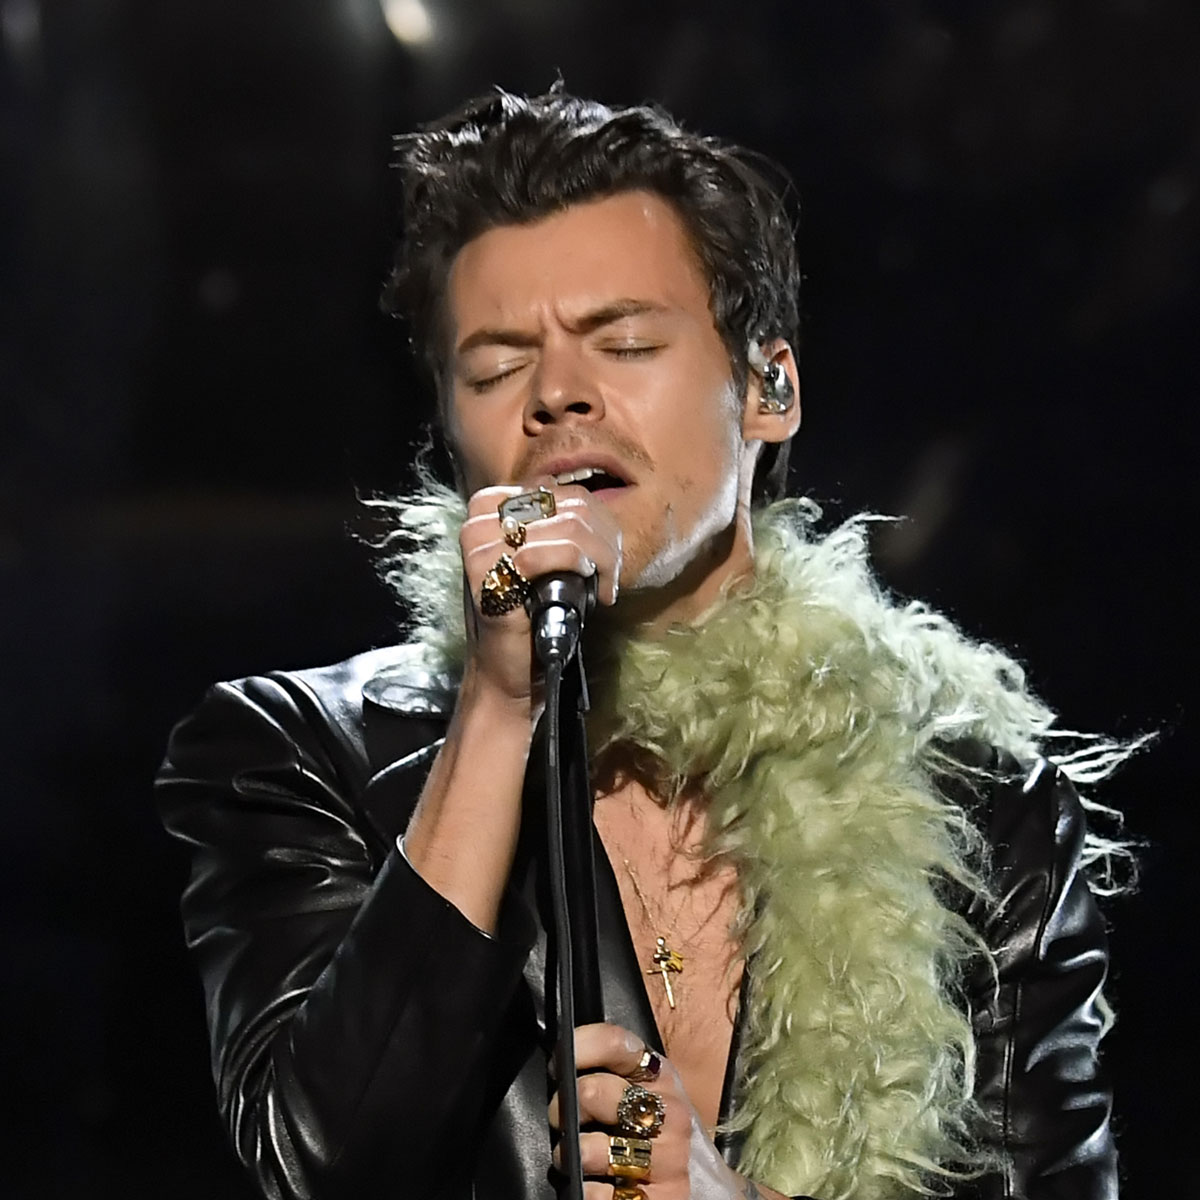 harry-styles-grammy-awards-2021-hairstyle-man-for-himself